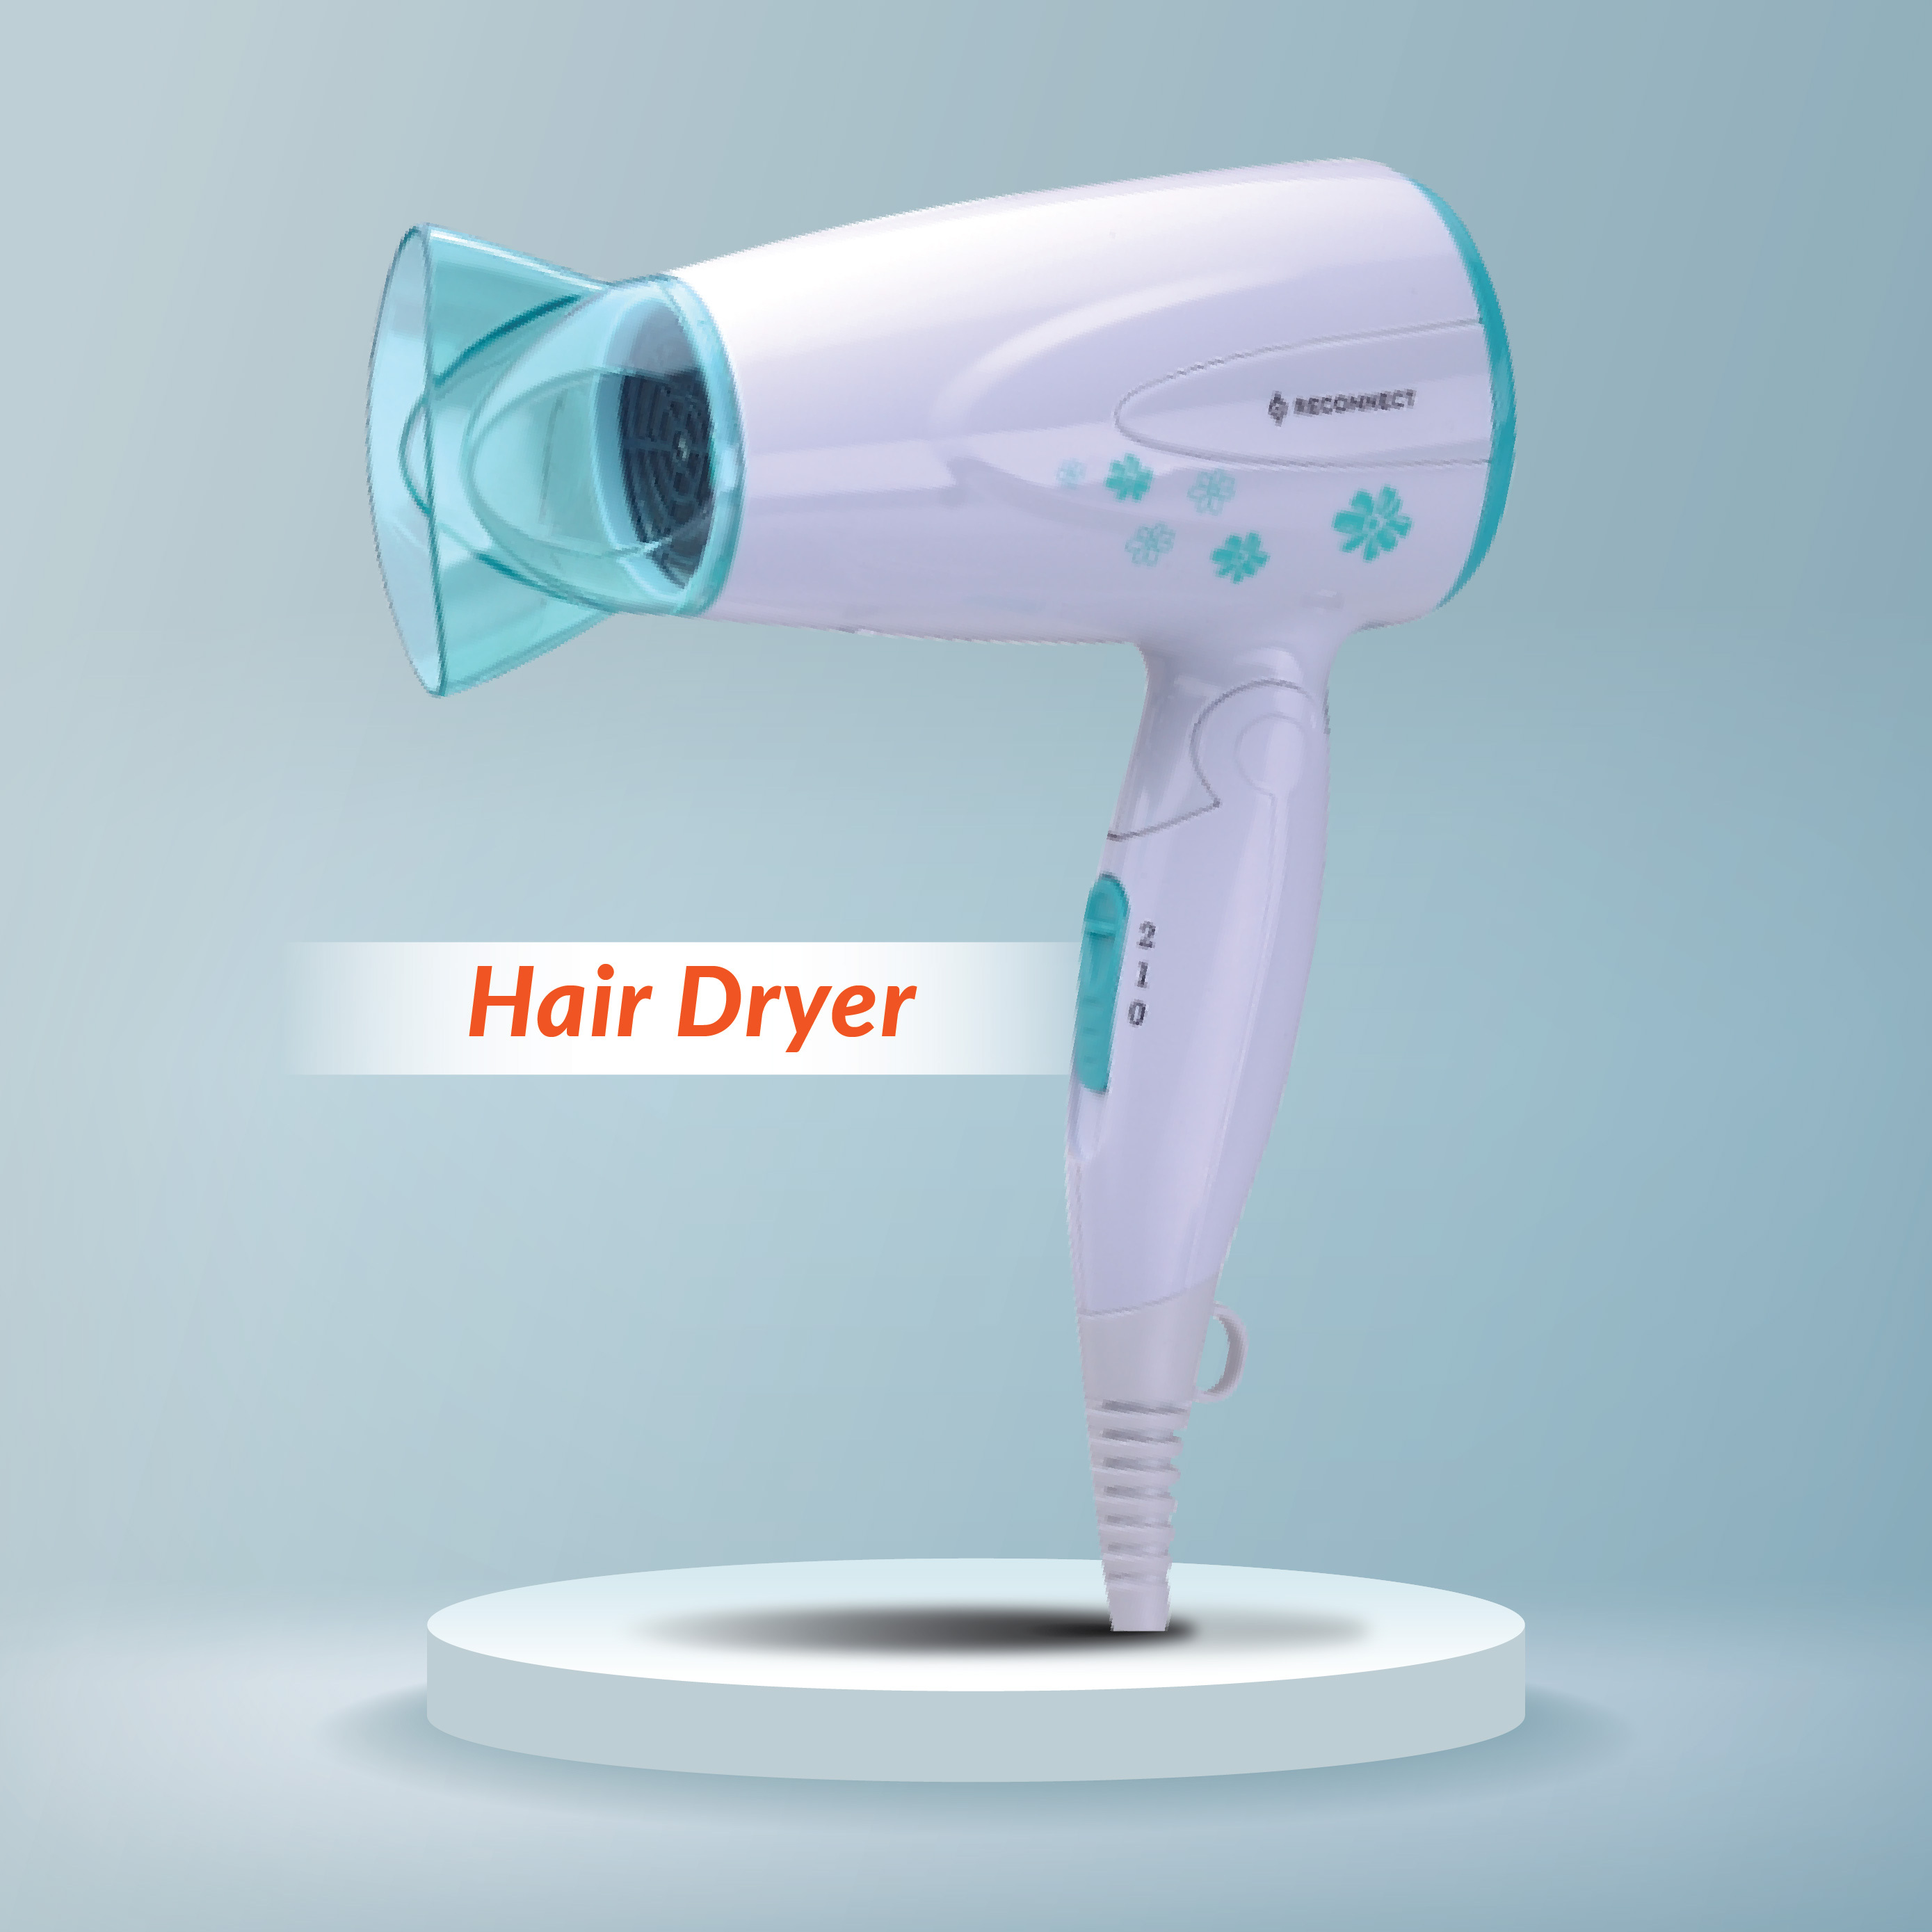 Buy Reconnect Hair Dryer 1000W RP5303 at Reliance Digital